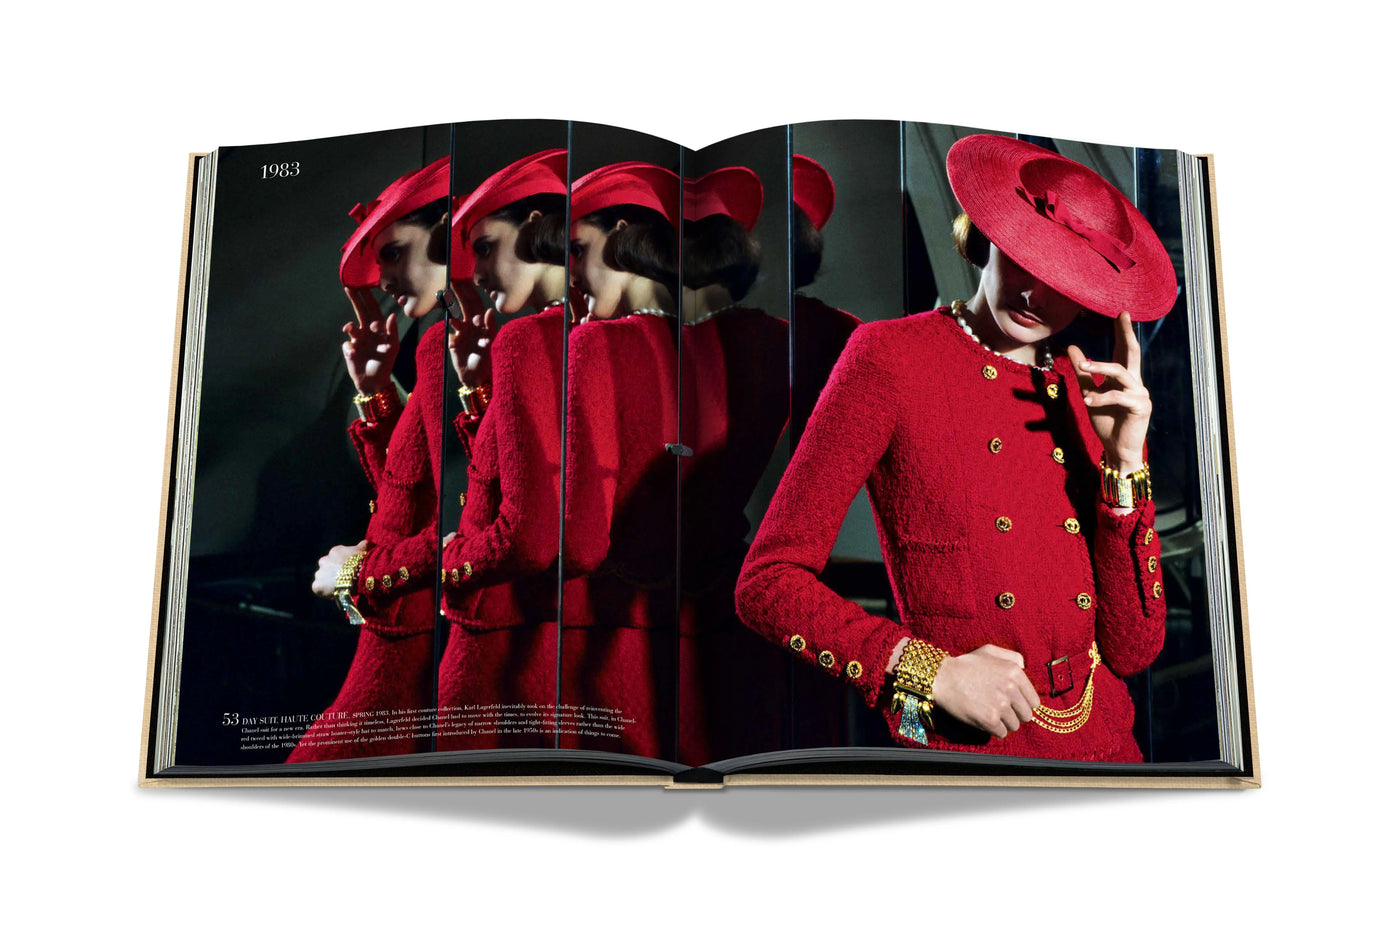 Chanel: The Impossible Collection - Assouline